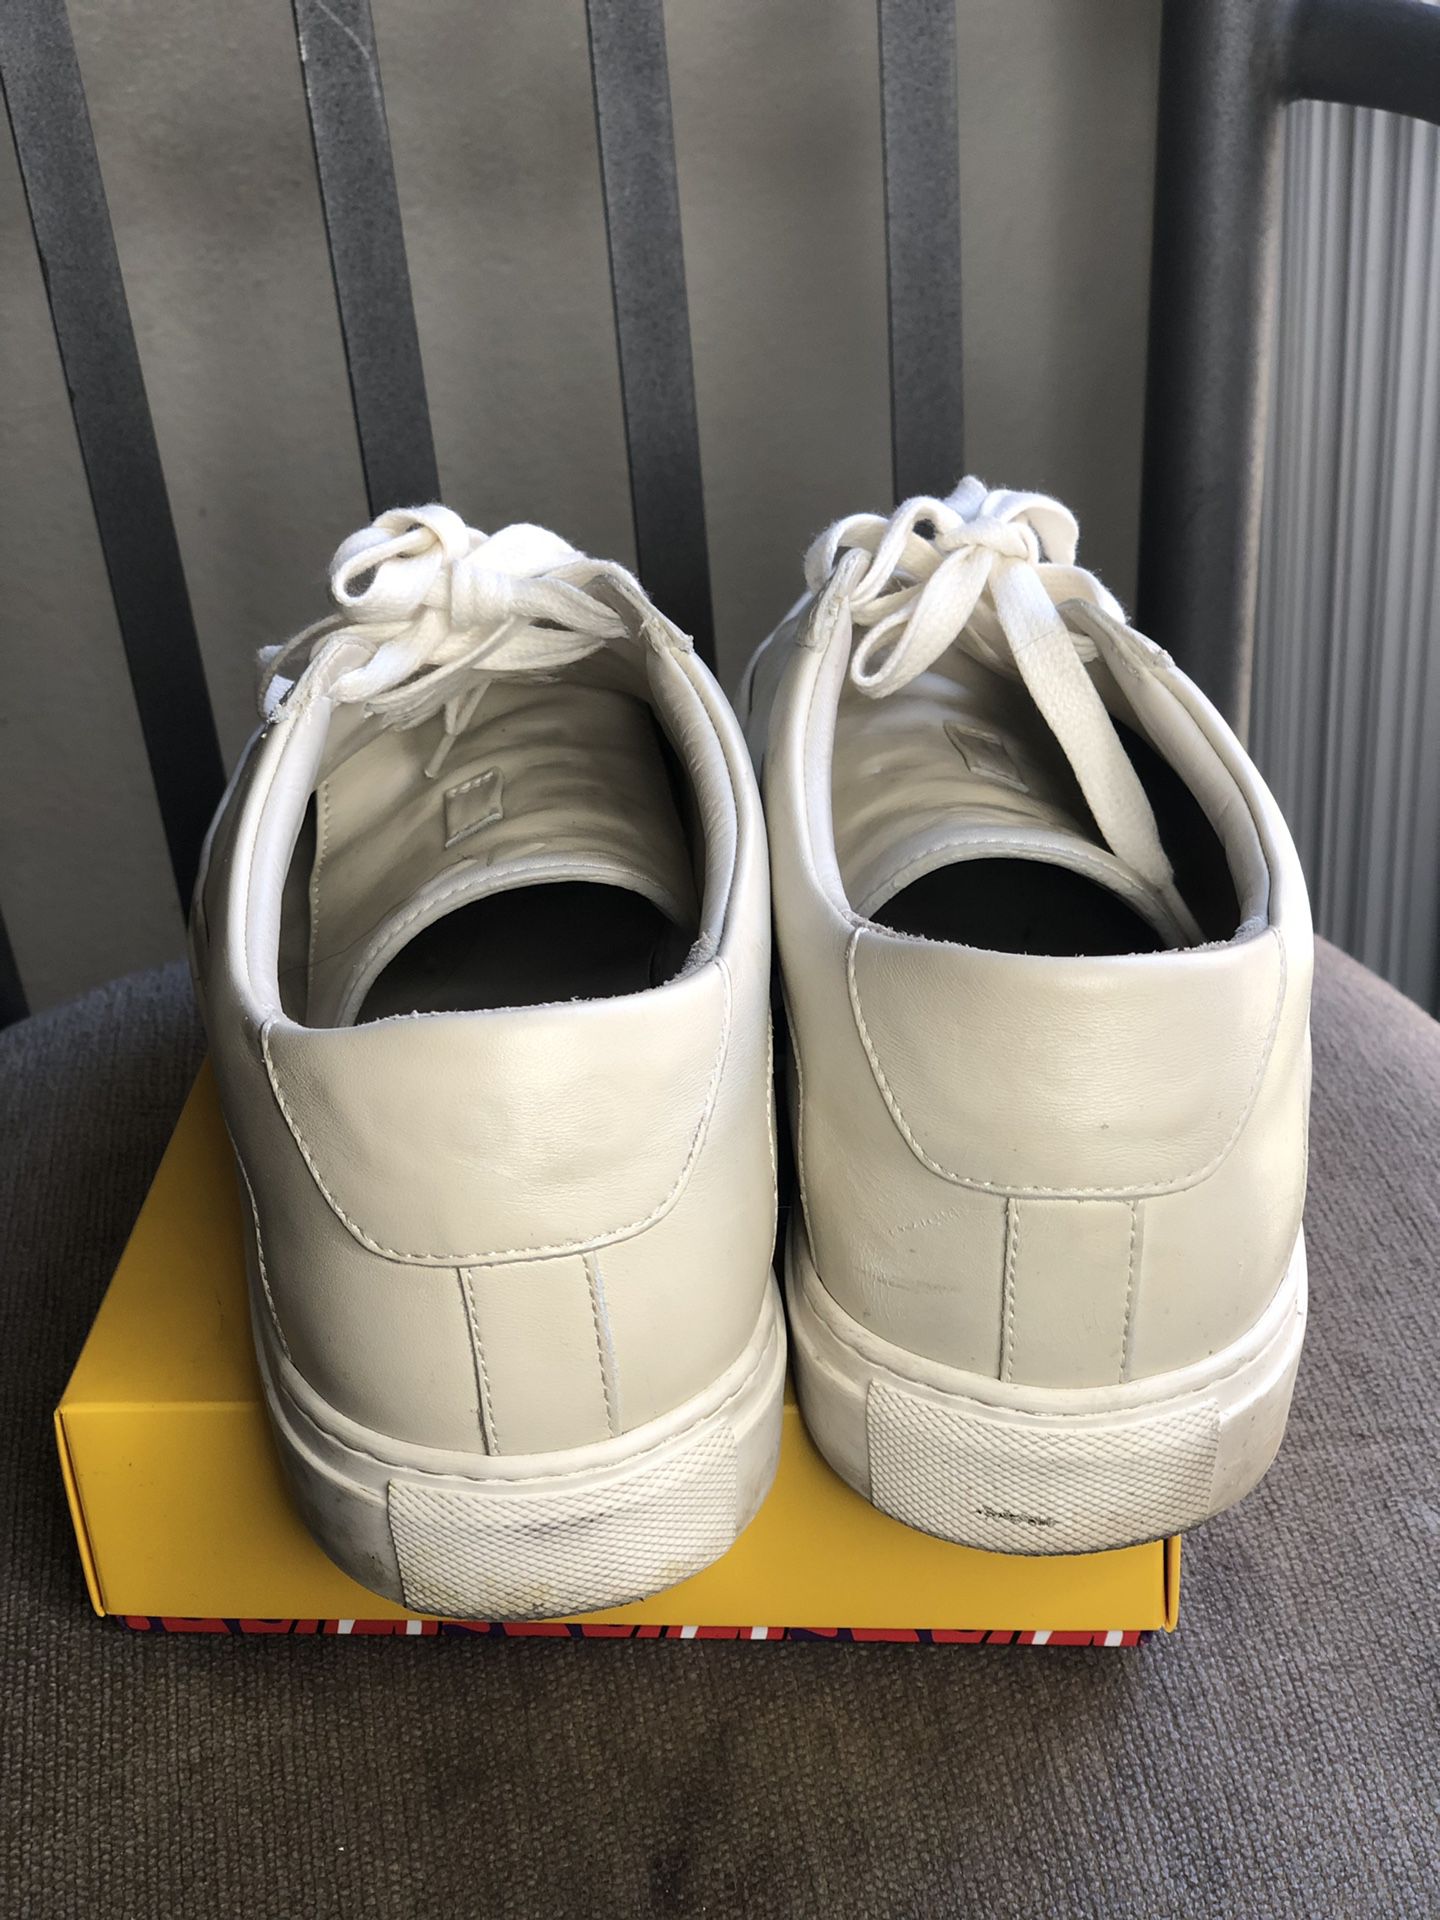 Koio Capri Nuvola Shoes / size 10 for Sale in Los Angeles, CA - OfferUp